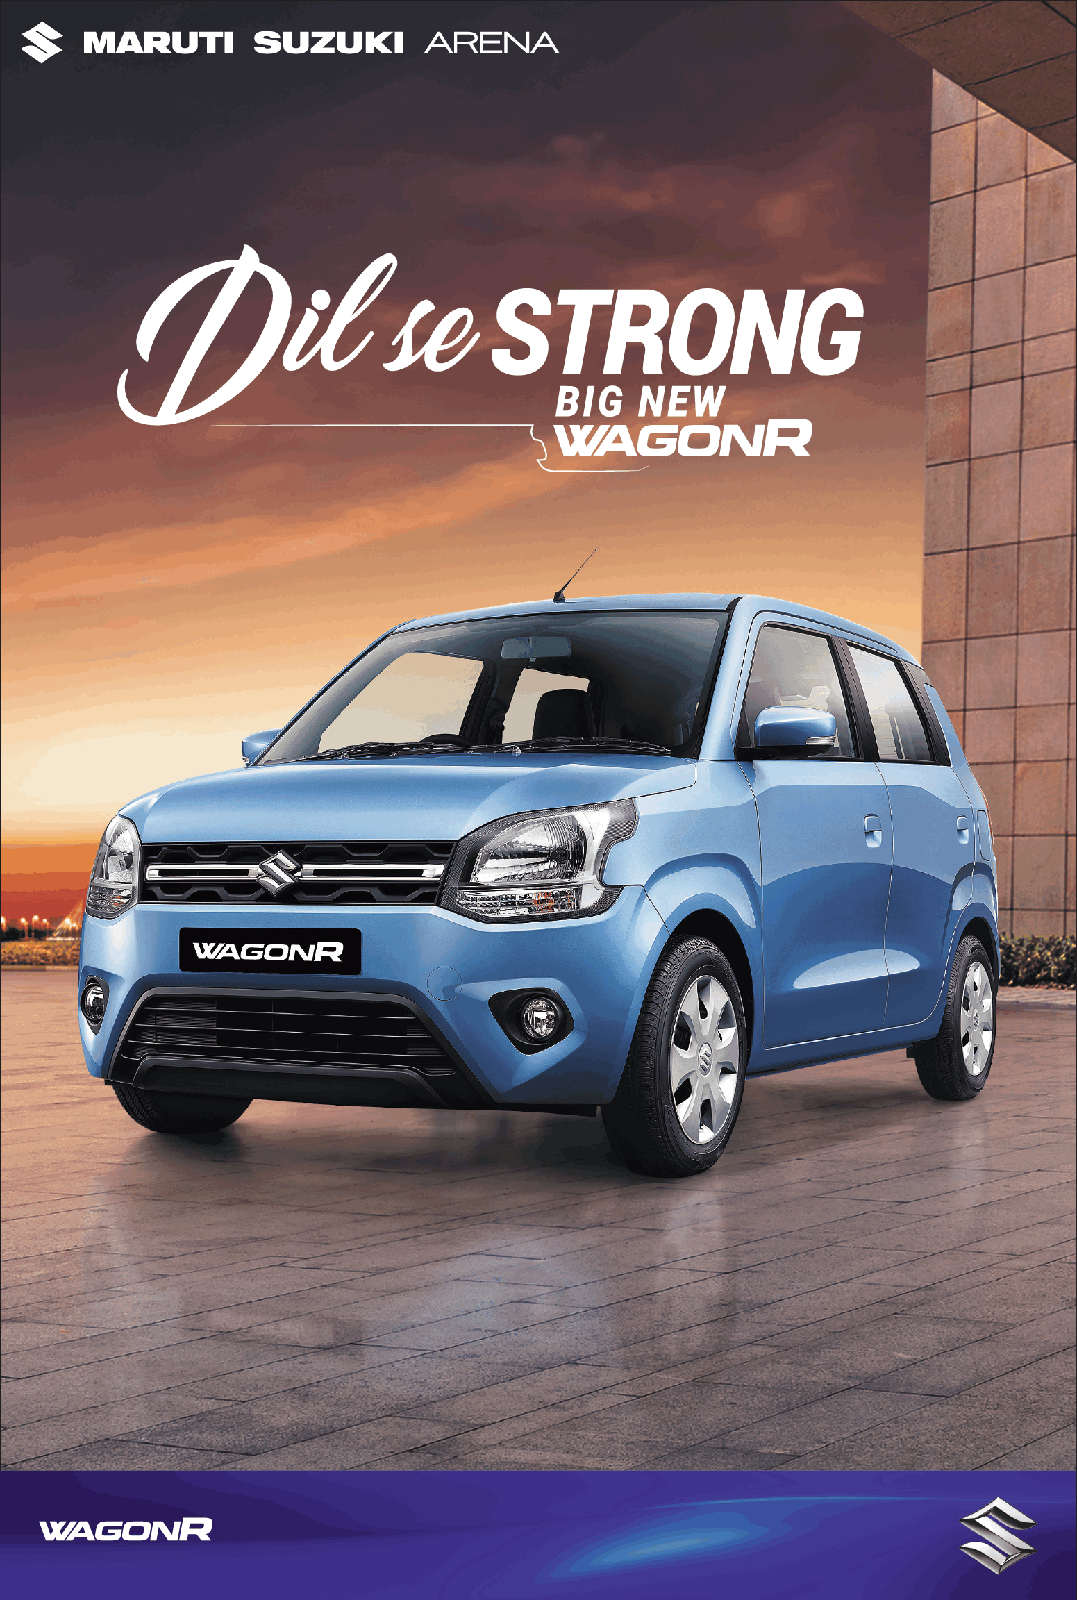 maruti-suzuki-arena-dil-se-strong-big-new-wagonr-ad-times-of-india-hyderabad-24-01-2019.png